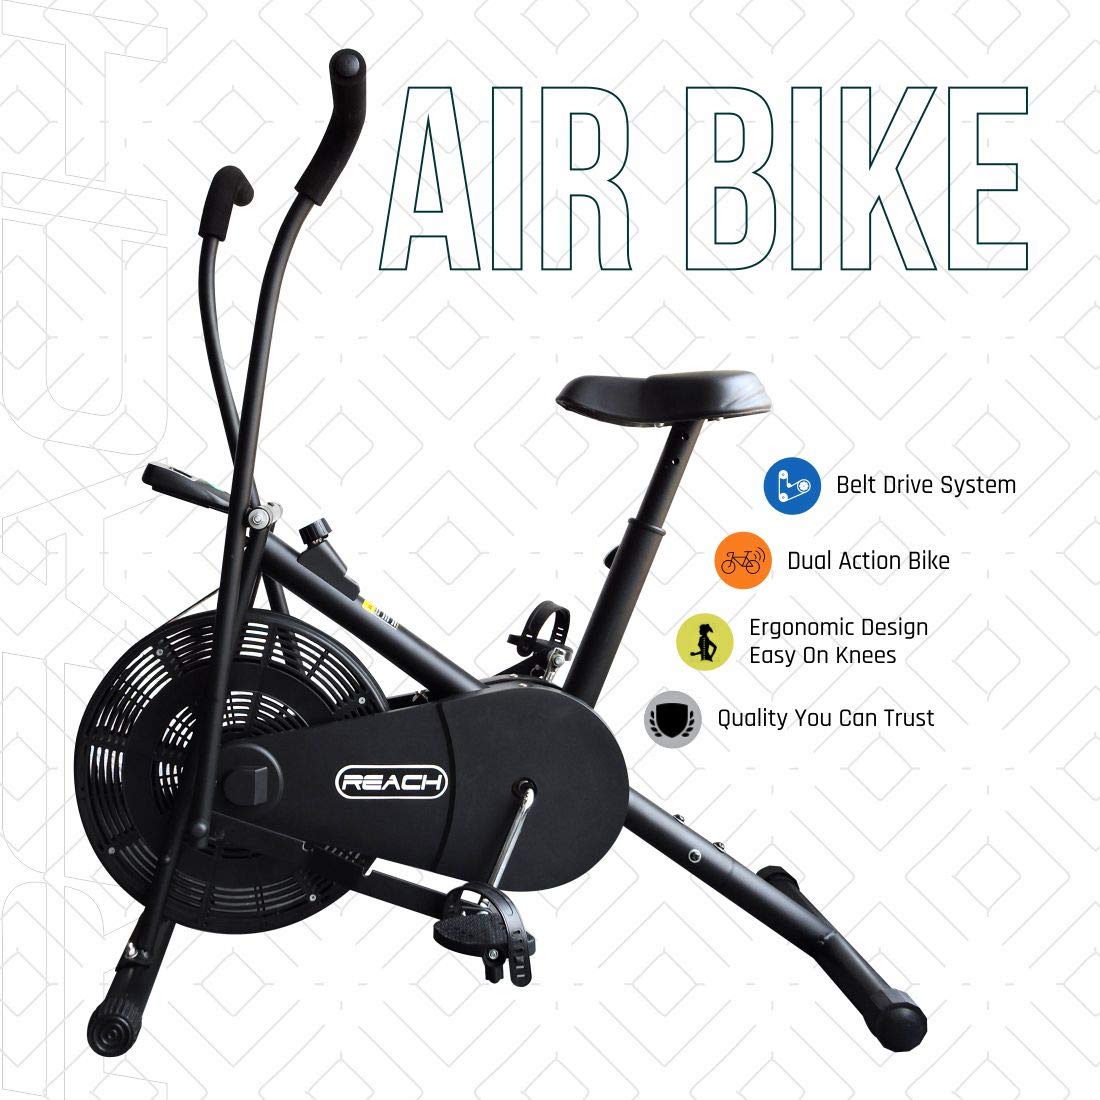 Reach Air Bike for weight loss in India